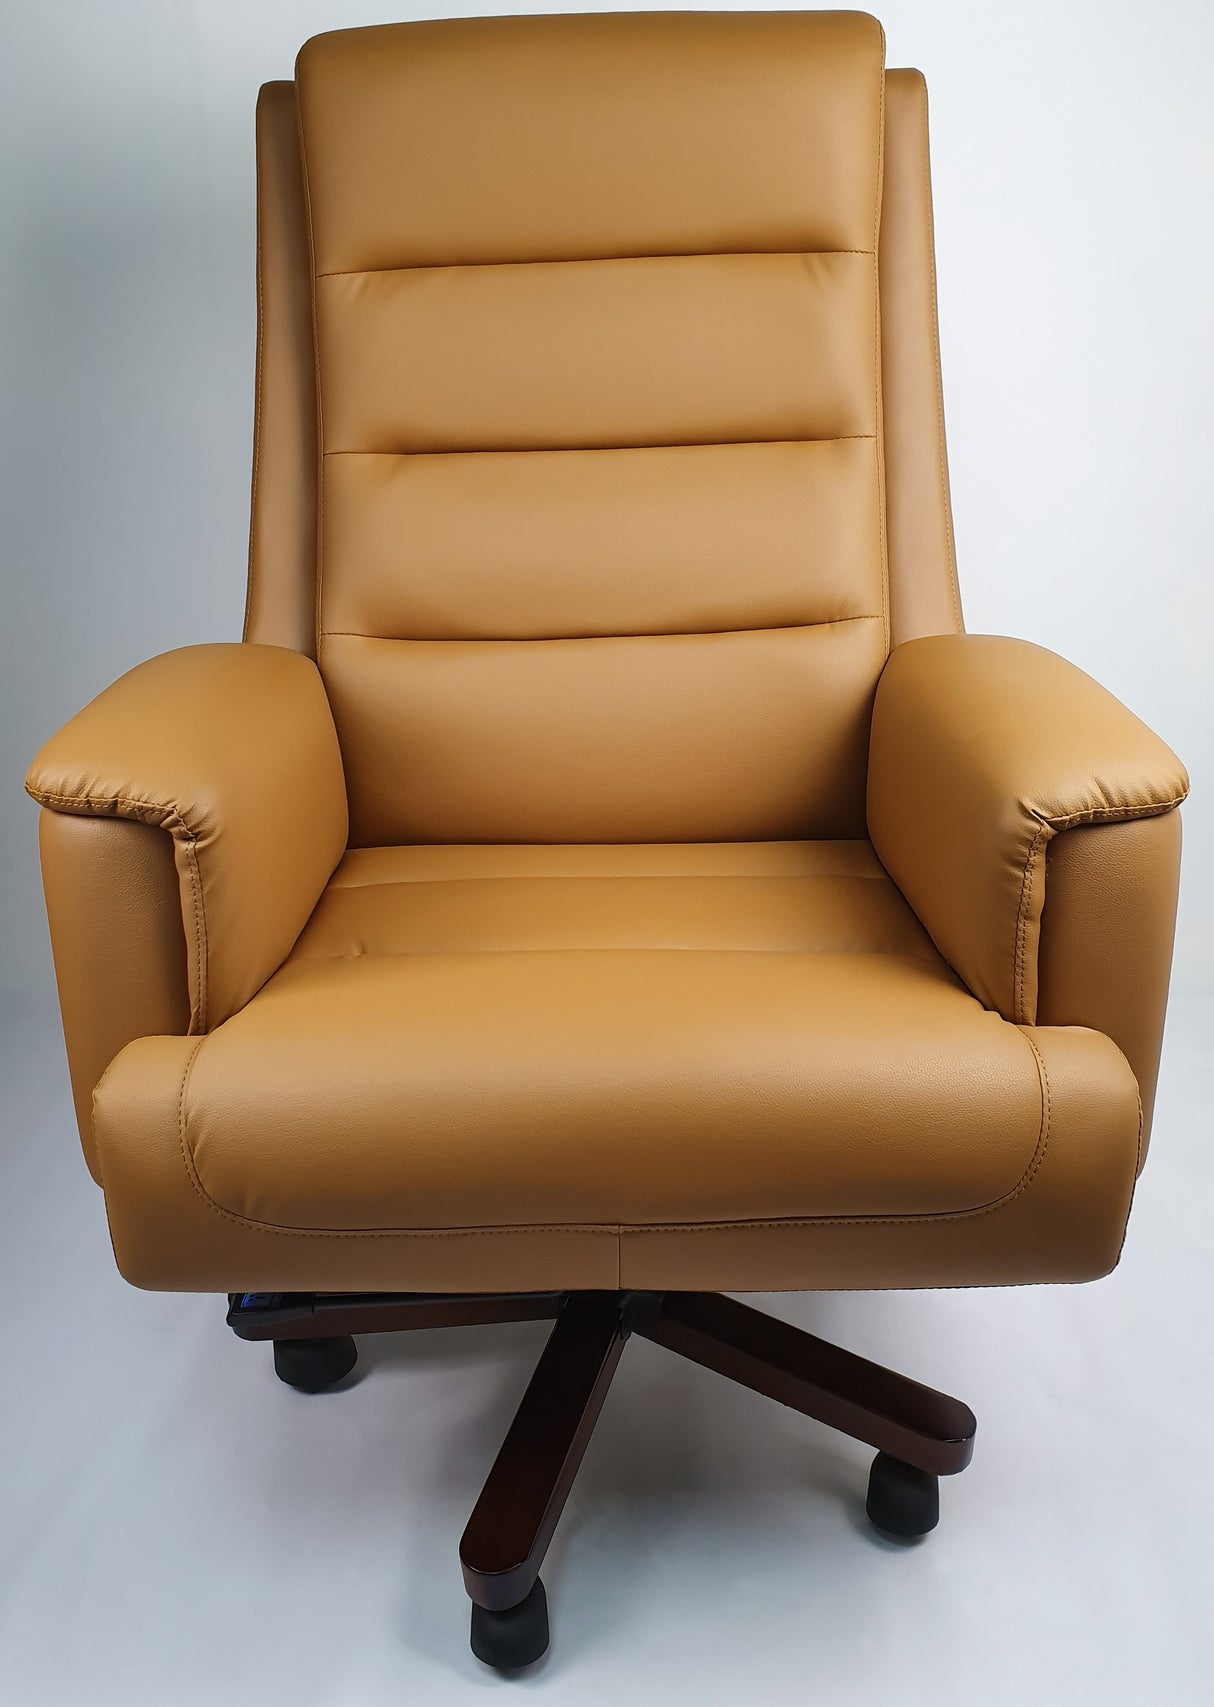 Beige Leather Executive Office Chair - 1840A